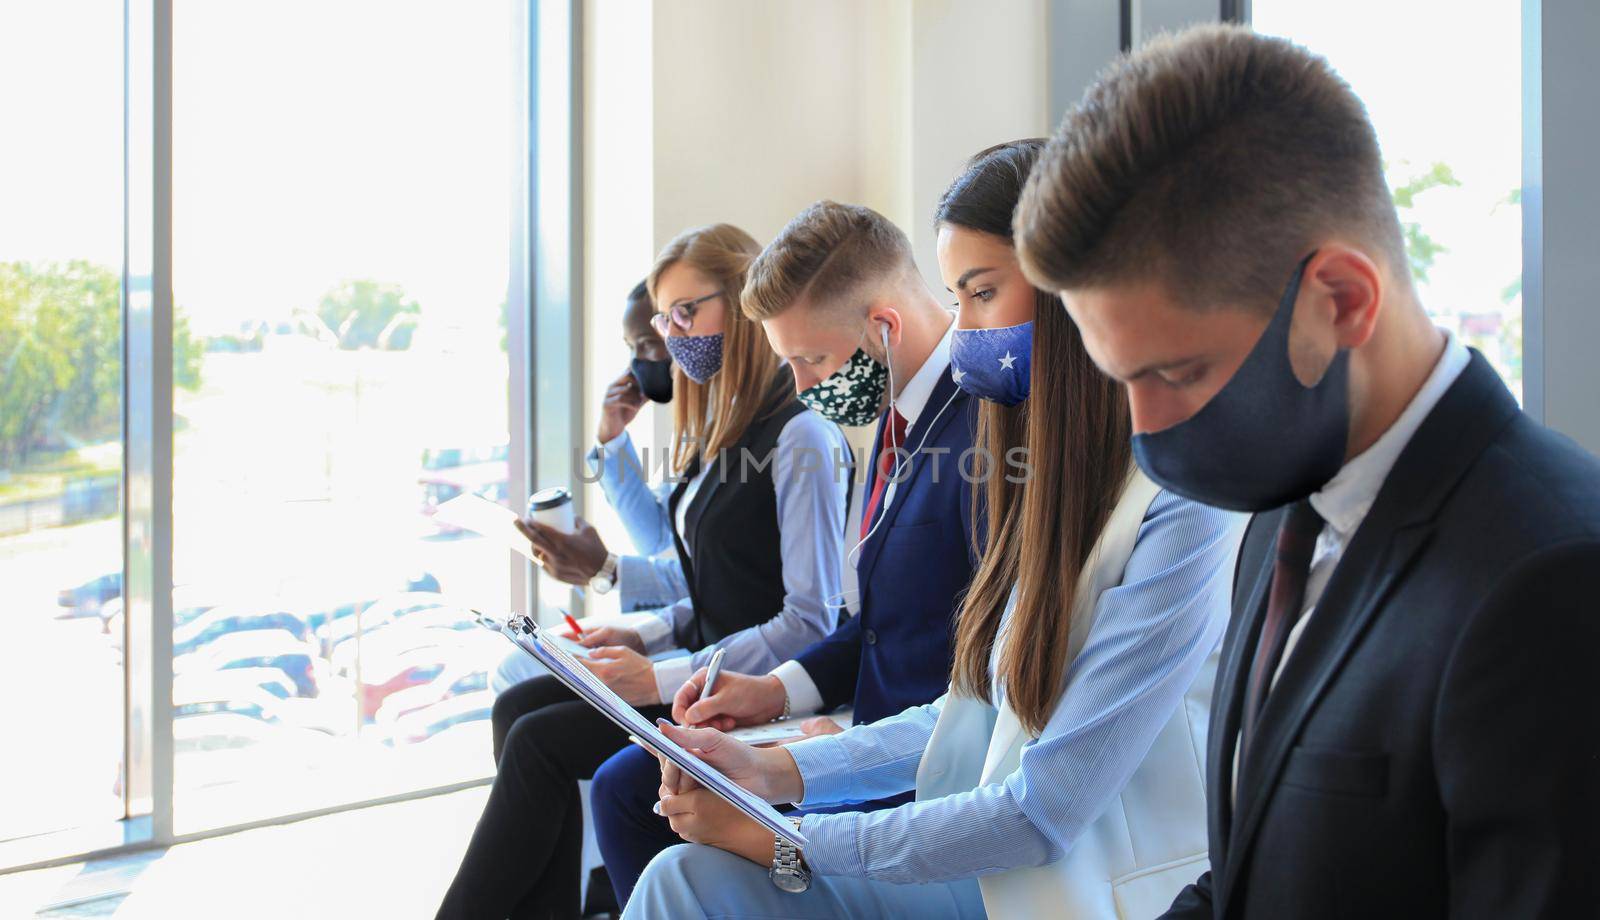 Stressful business people waiting for job interview with face mask, social distancing quarantine during COVID19 affect